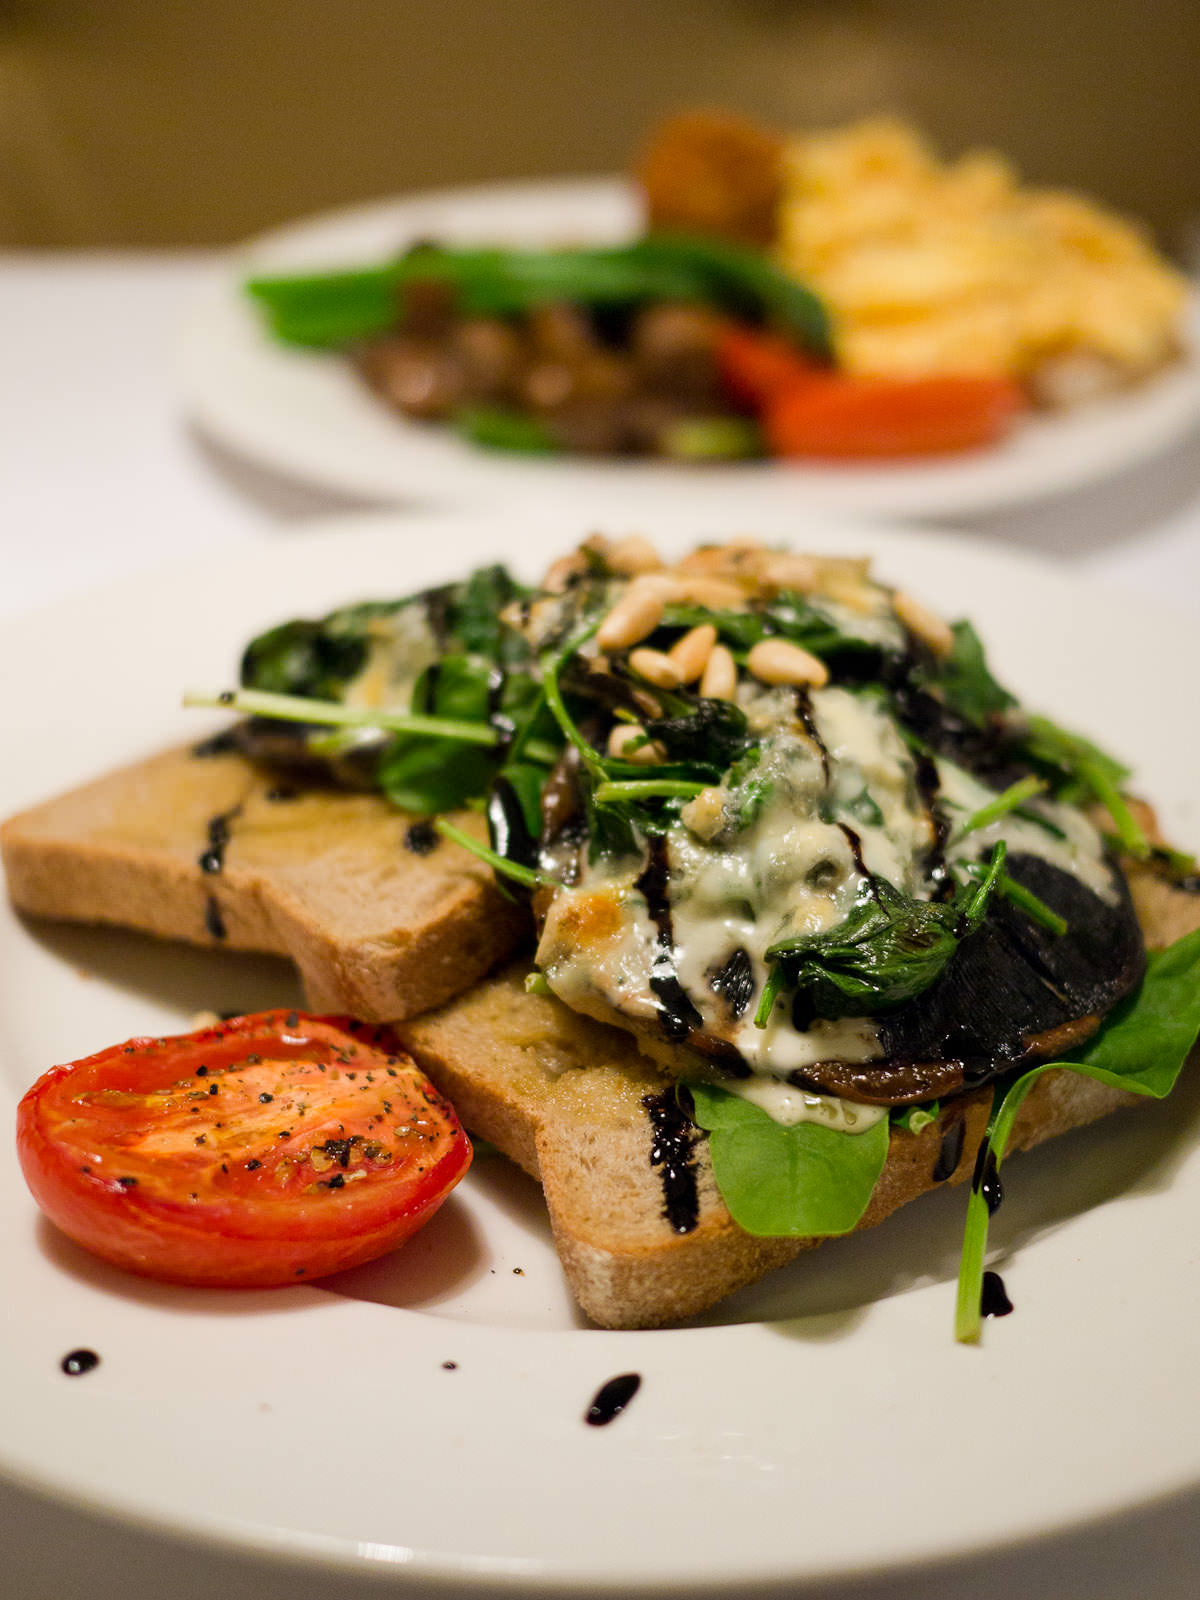 Grilled field mushrooms on rye with blue cheese, spinach, balsamic vinegar and roasted pine nuts (AU$18.10)